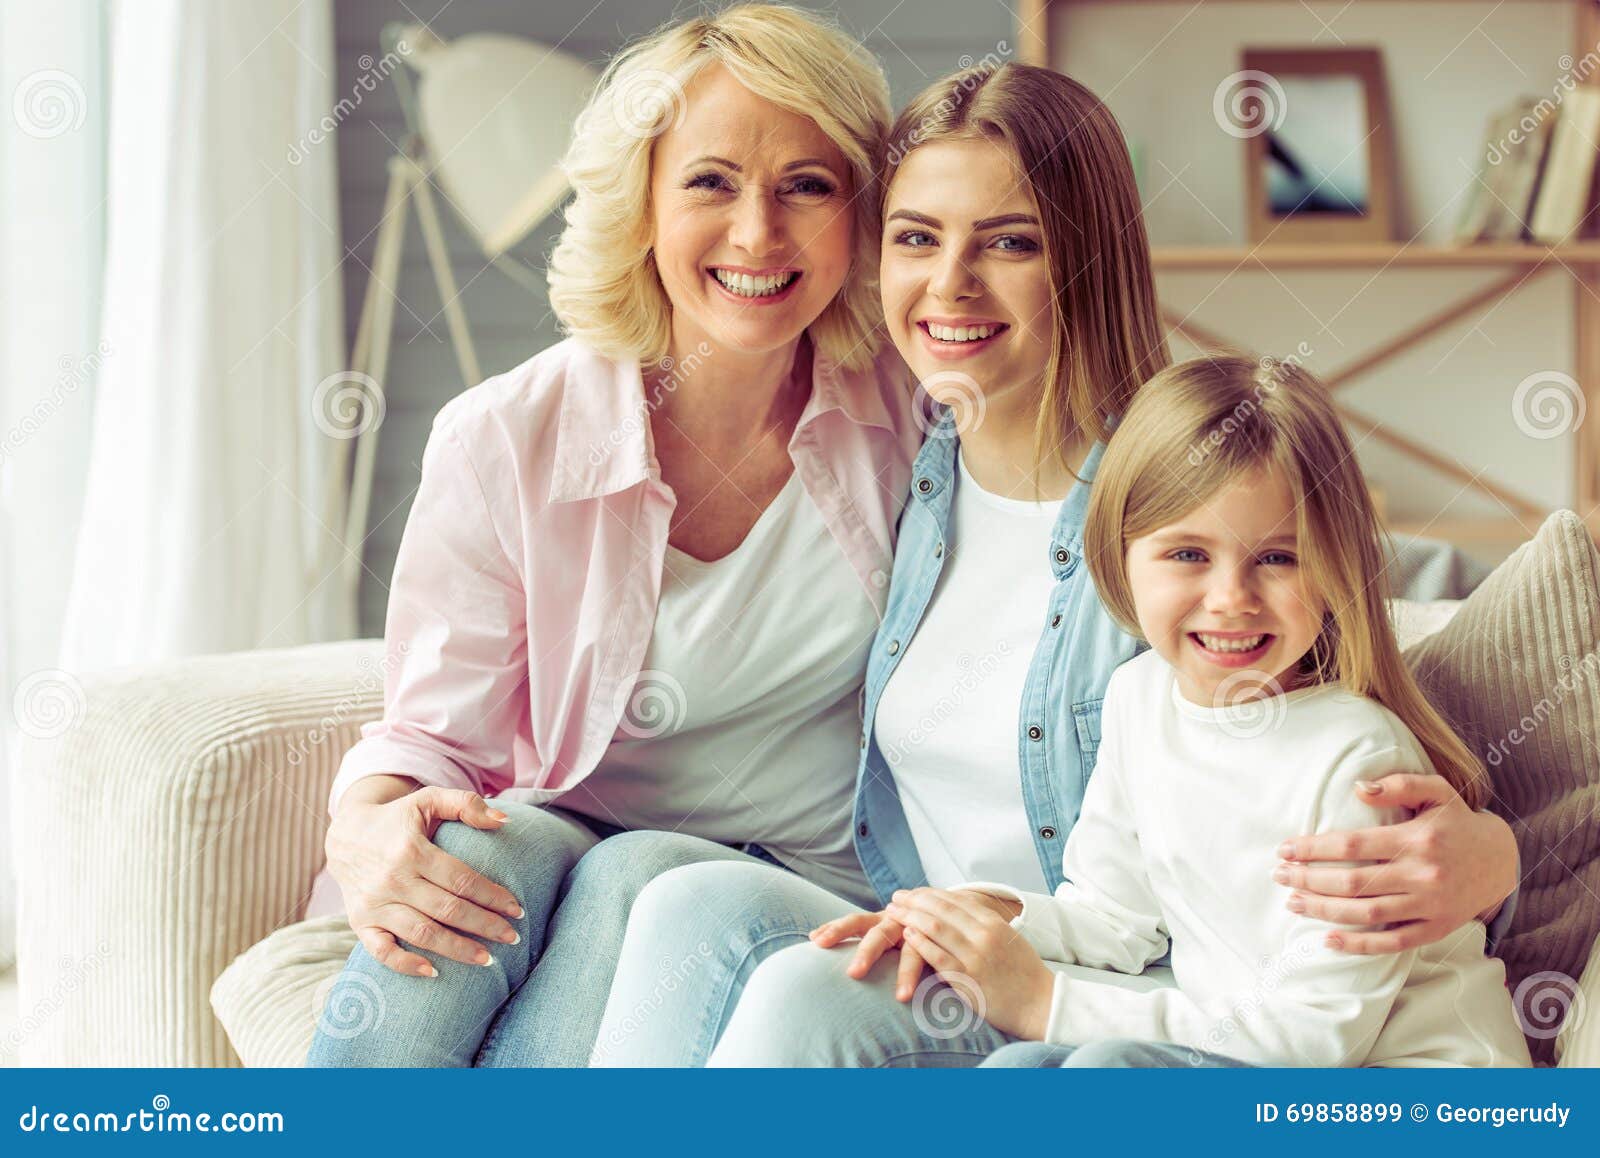 Granny Mom And Daughter Stock Image Image Of Face Looking 698